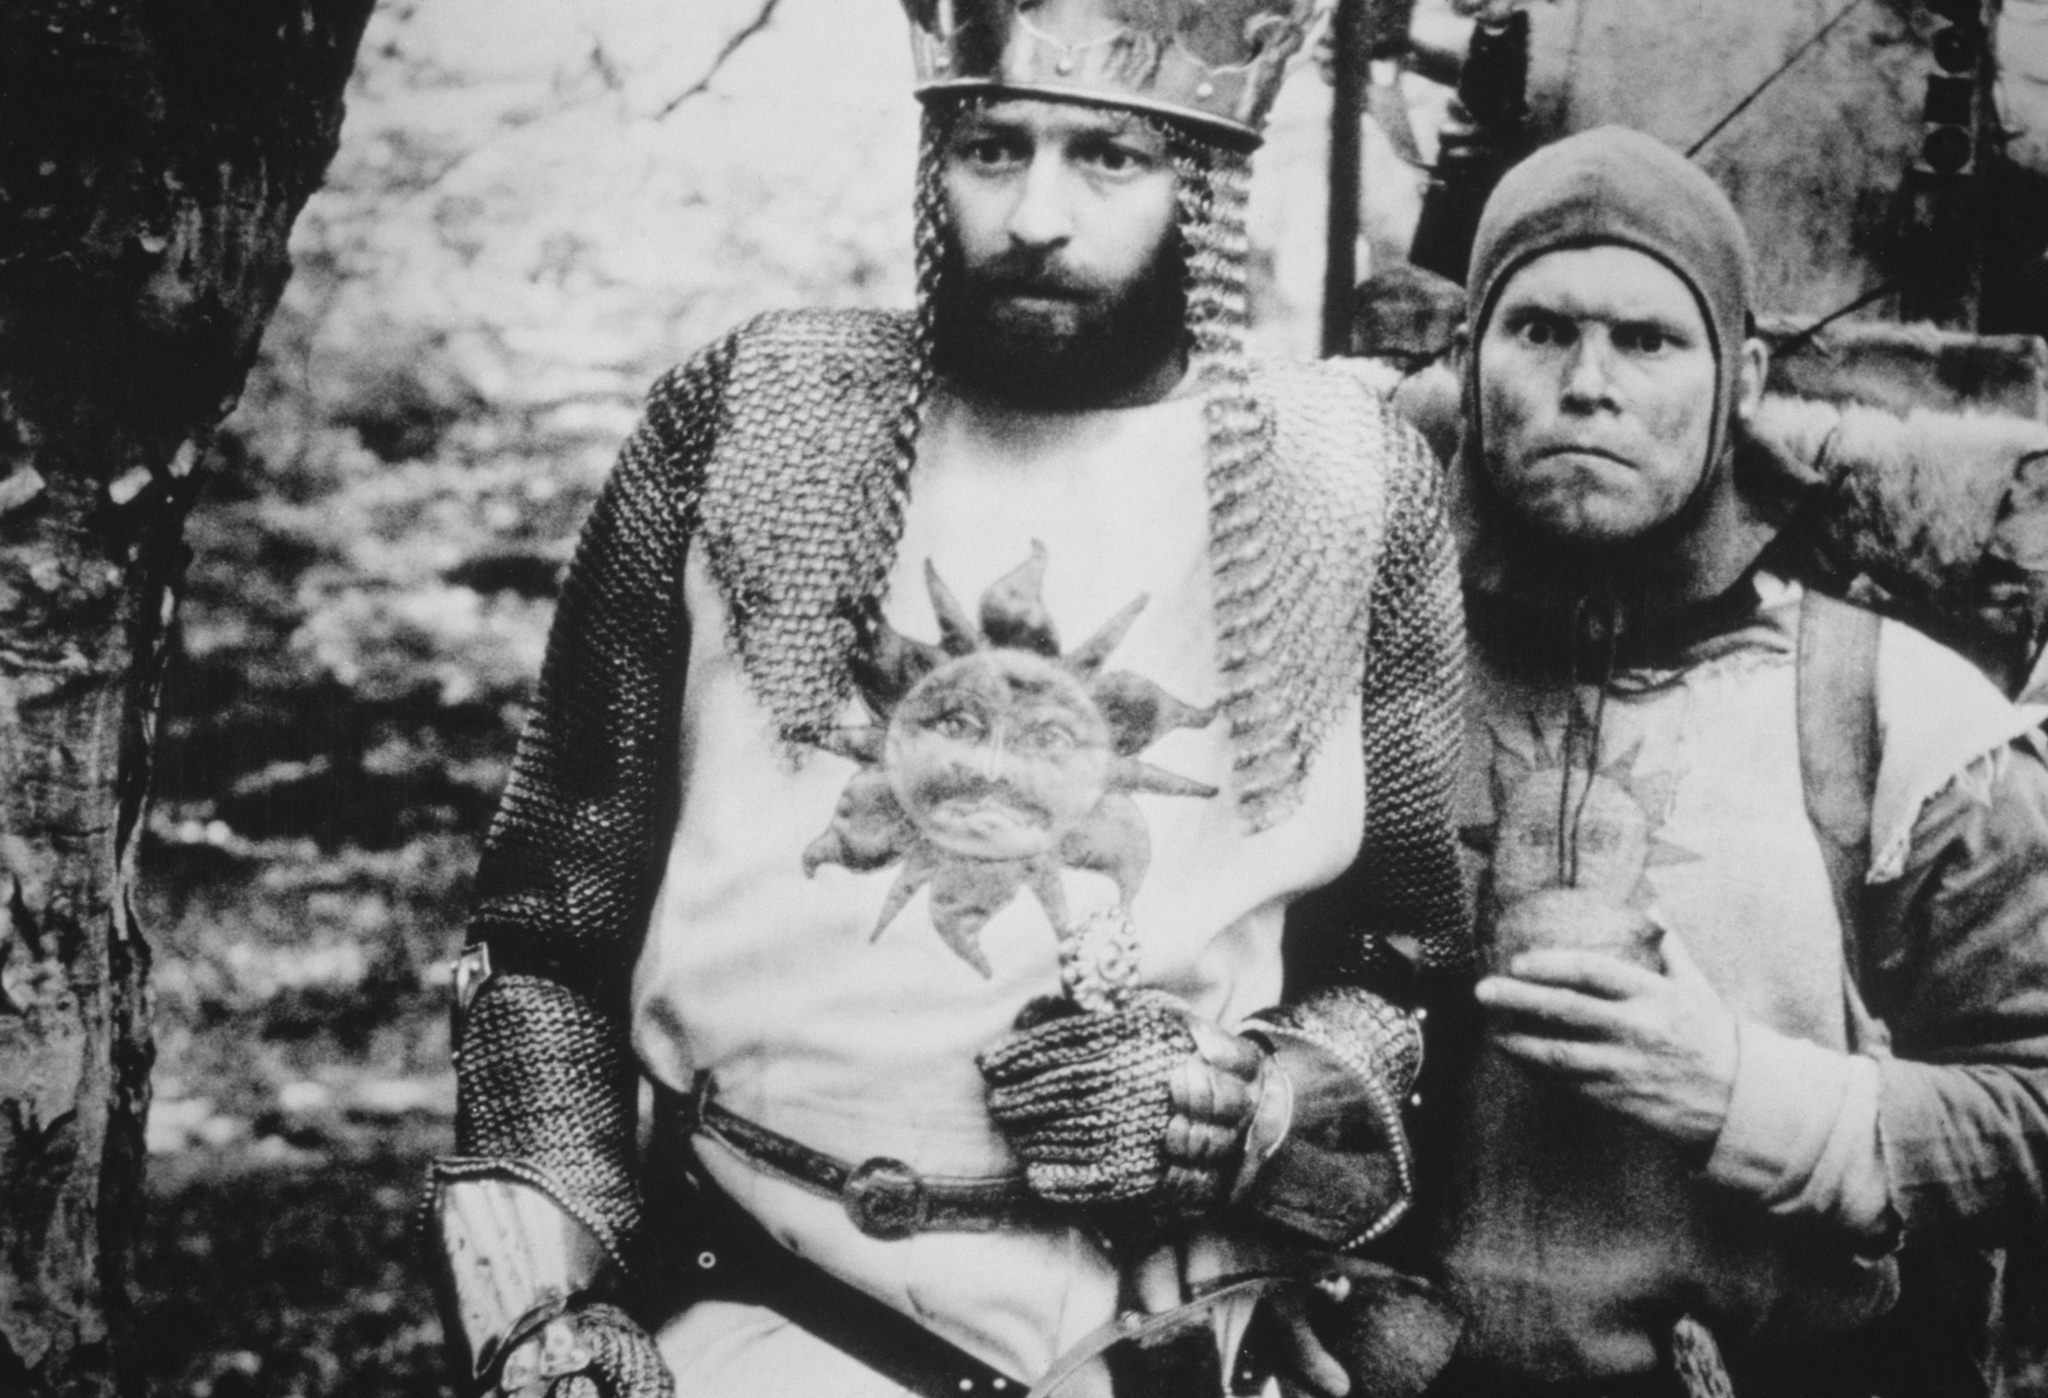 Terry Gilliam, Graham Chapman, and Monty Python in Monty Python and the Holy Grail (1975)